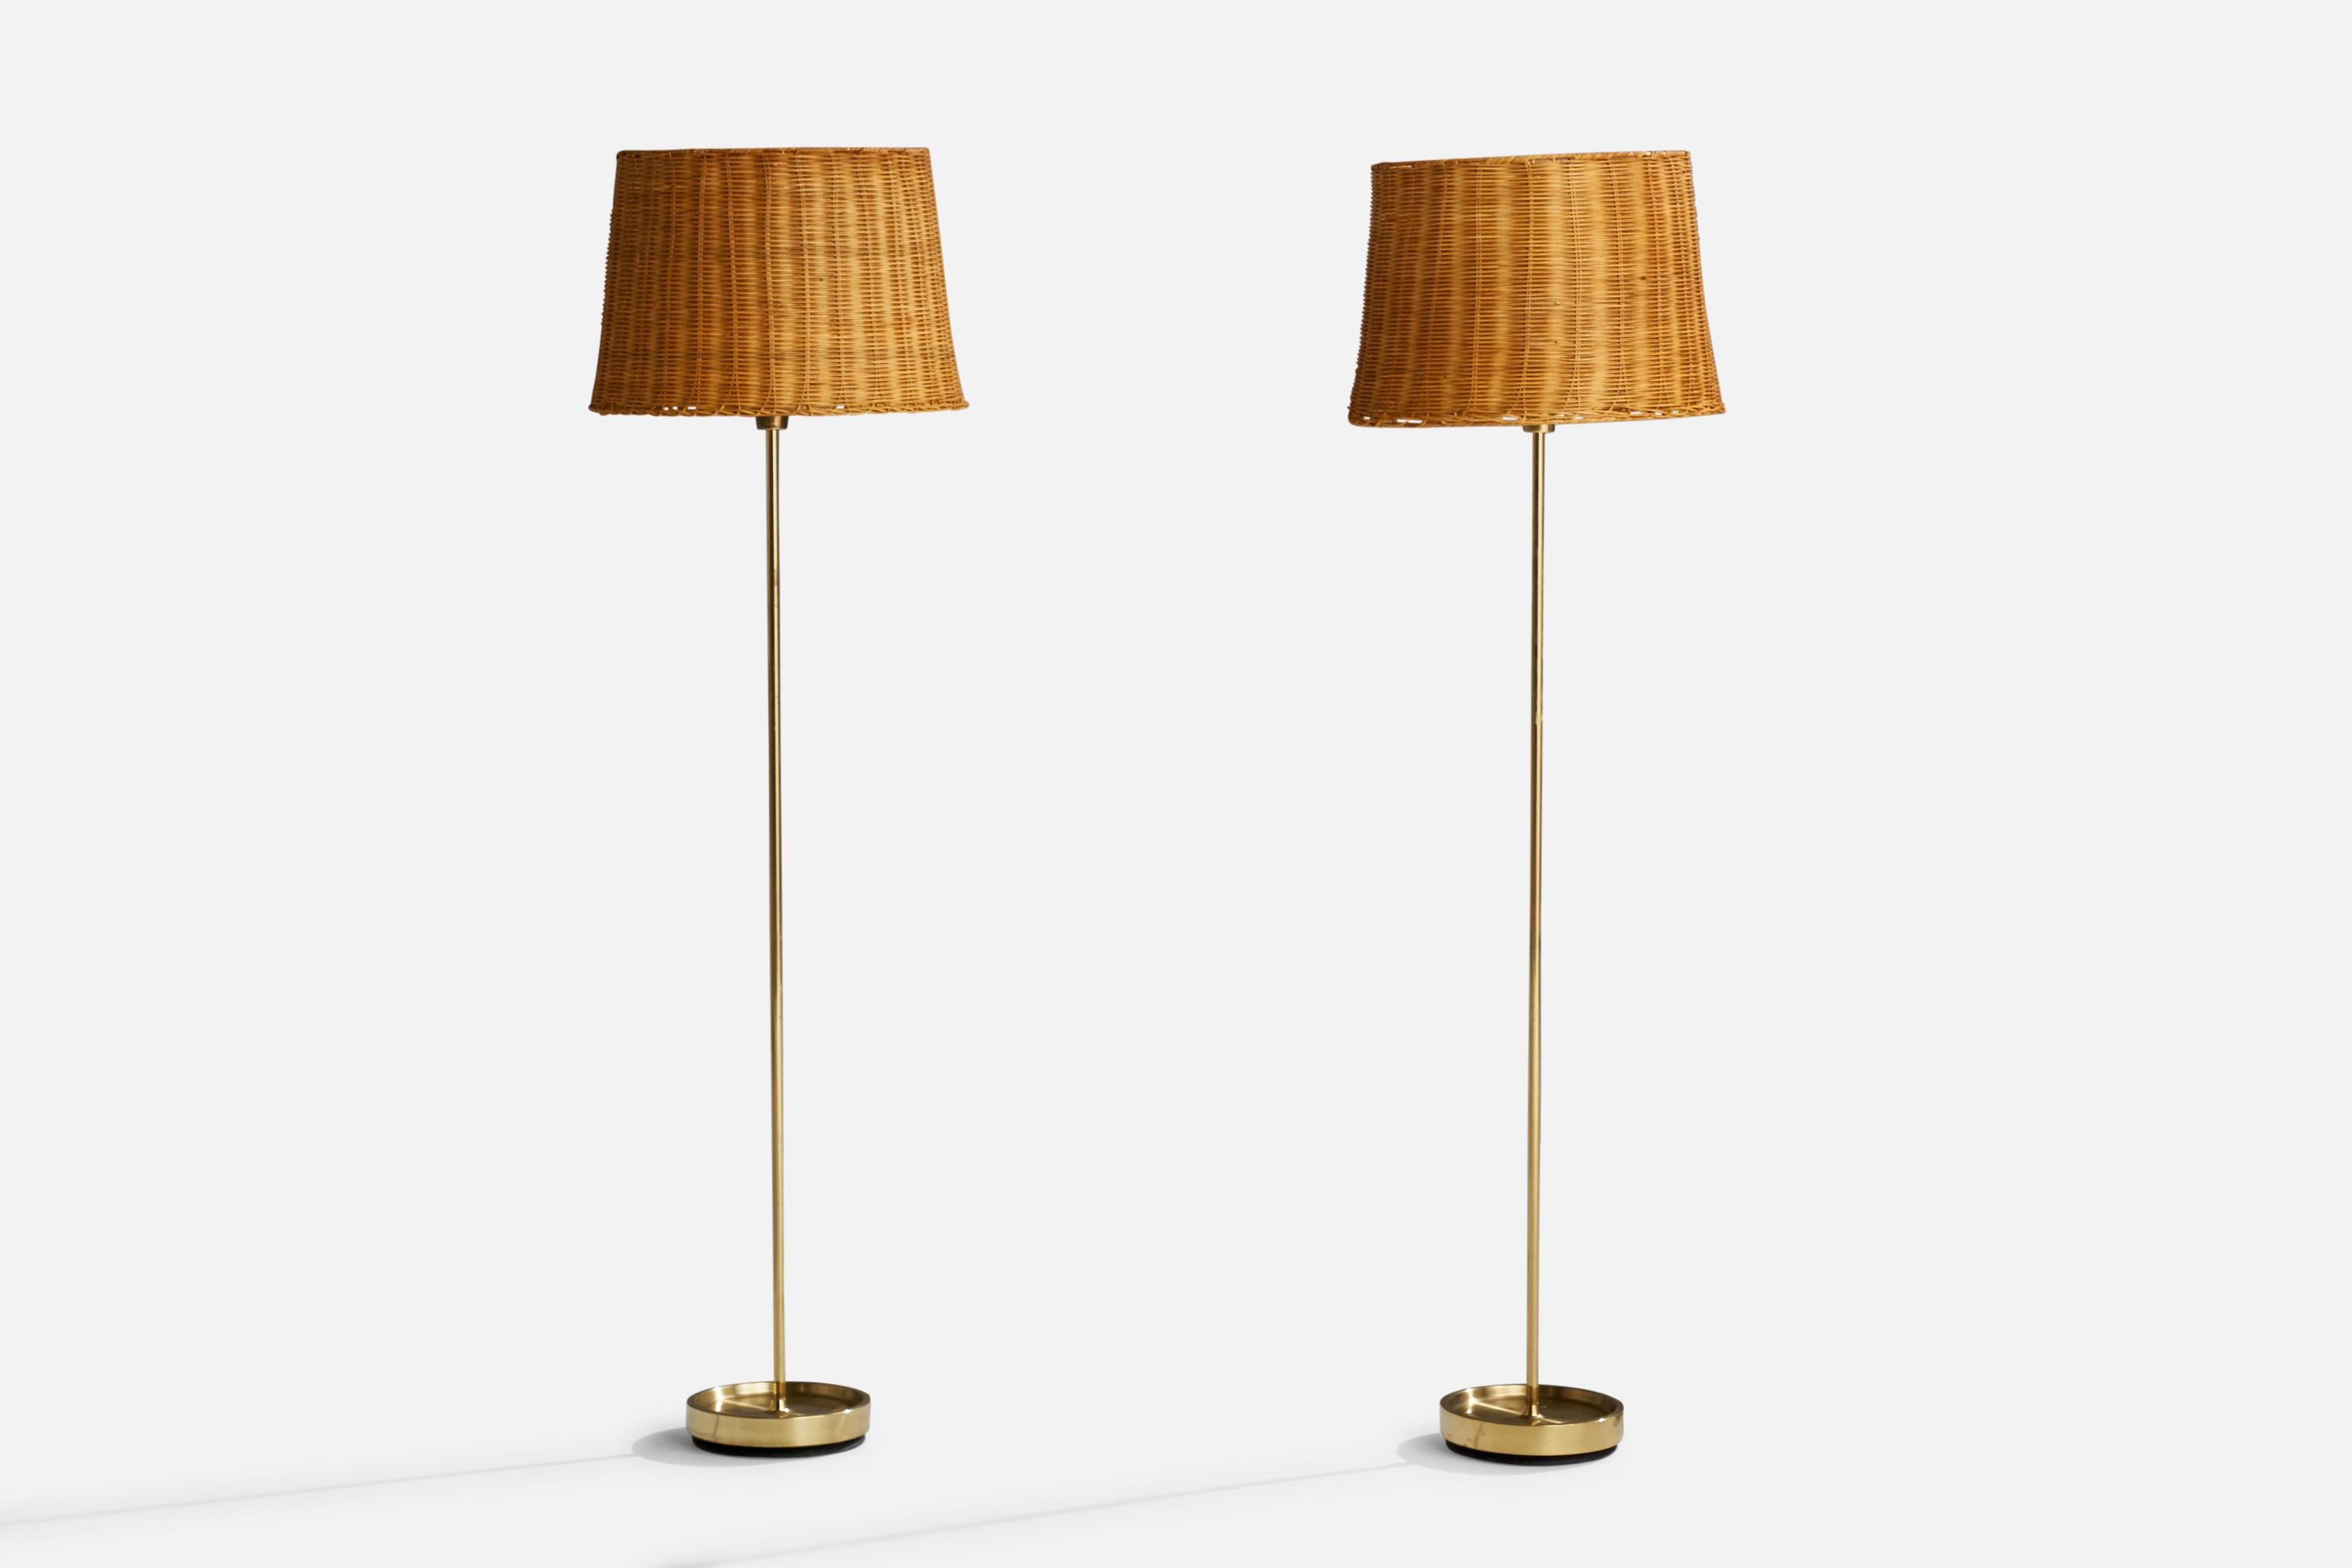 A pair of brass and rattan floor lamps designed and produced by Fagerhults Belysning, Sweden, 1960s.

Overall Dimensions (inches): 57.5”  H x 16” W x 17.5” D
Stated dimensions include shade.
Bulb Specifications: E-26 Bulb
Number of Sockets: 2
All